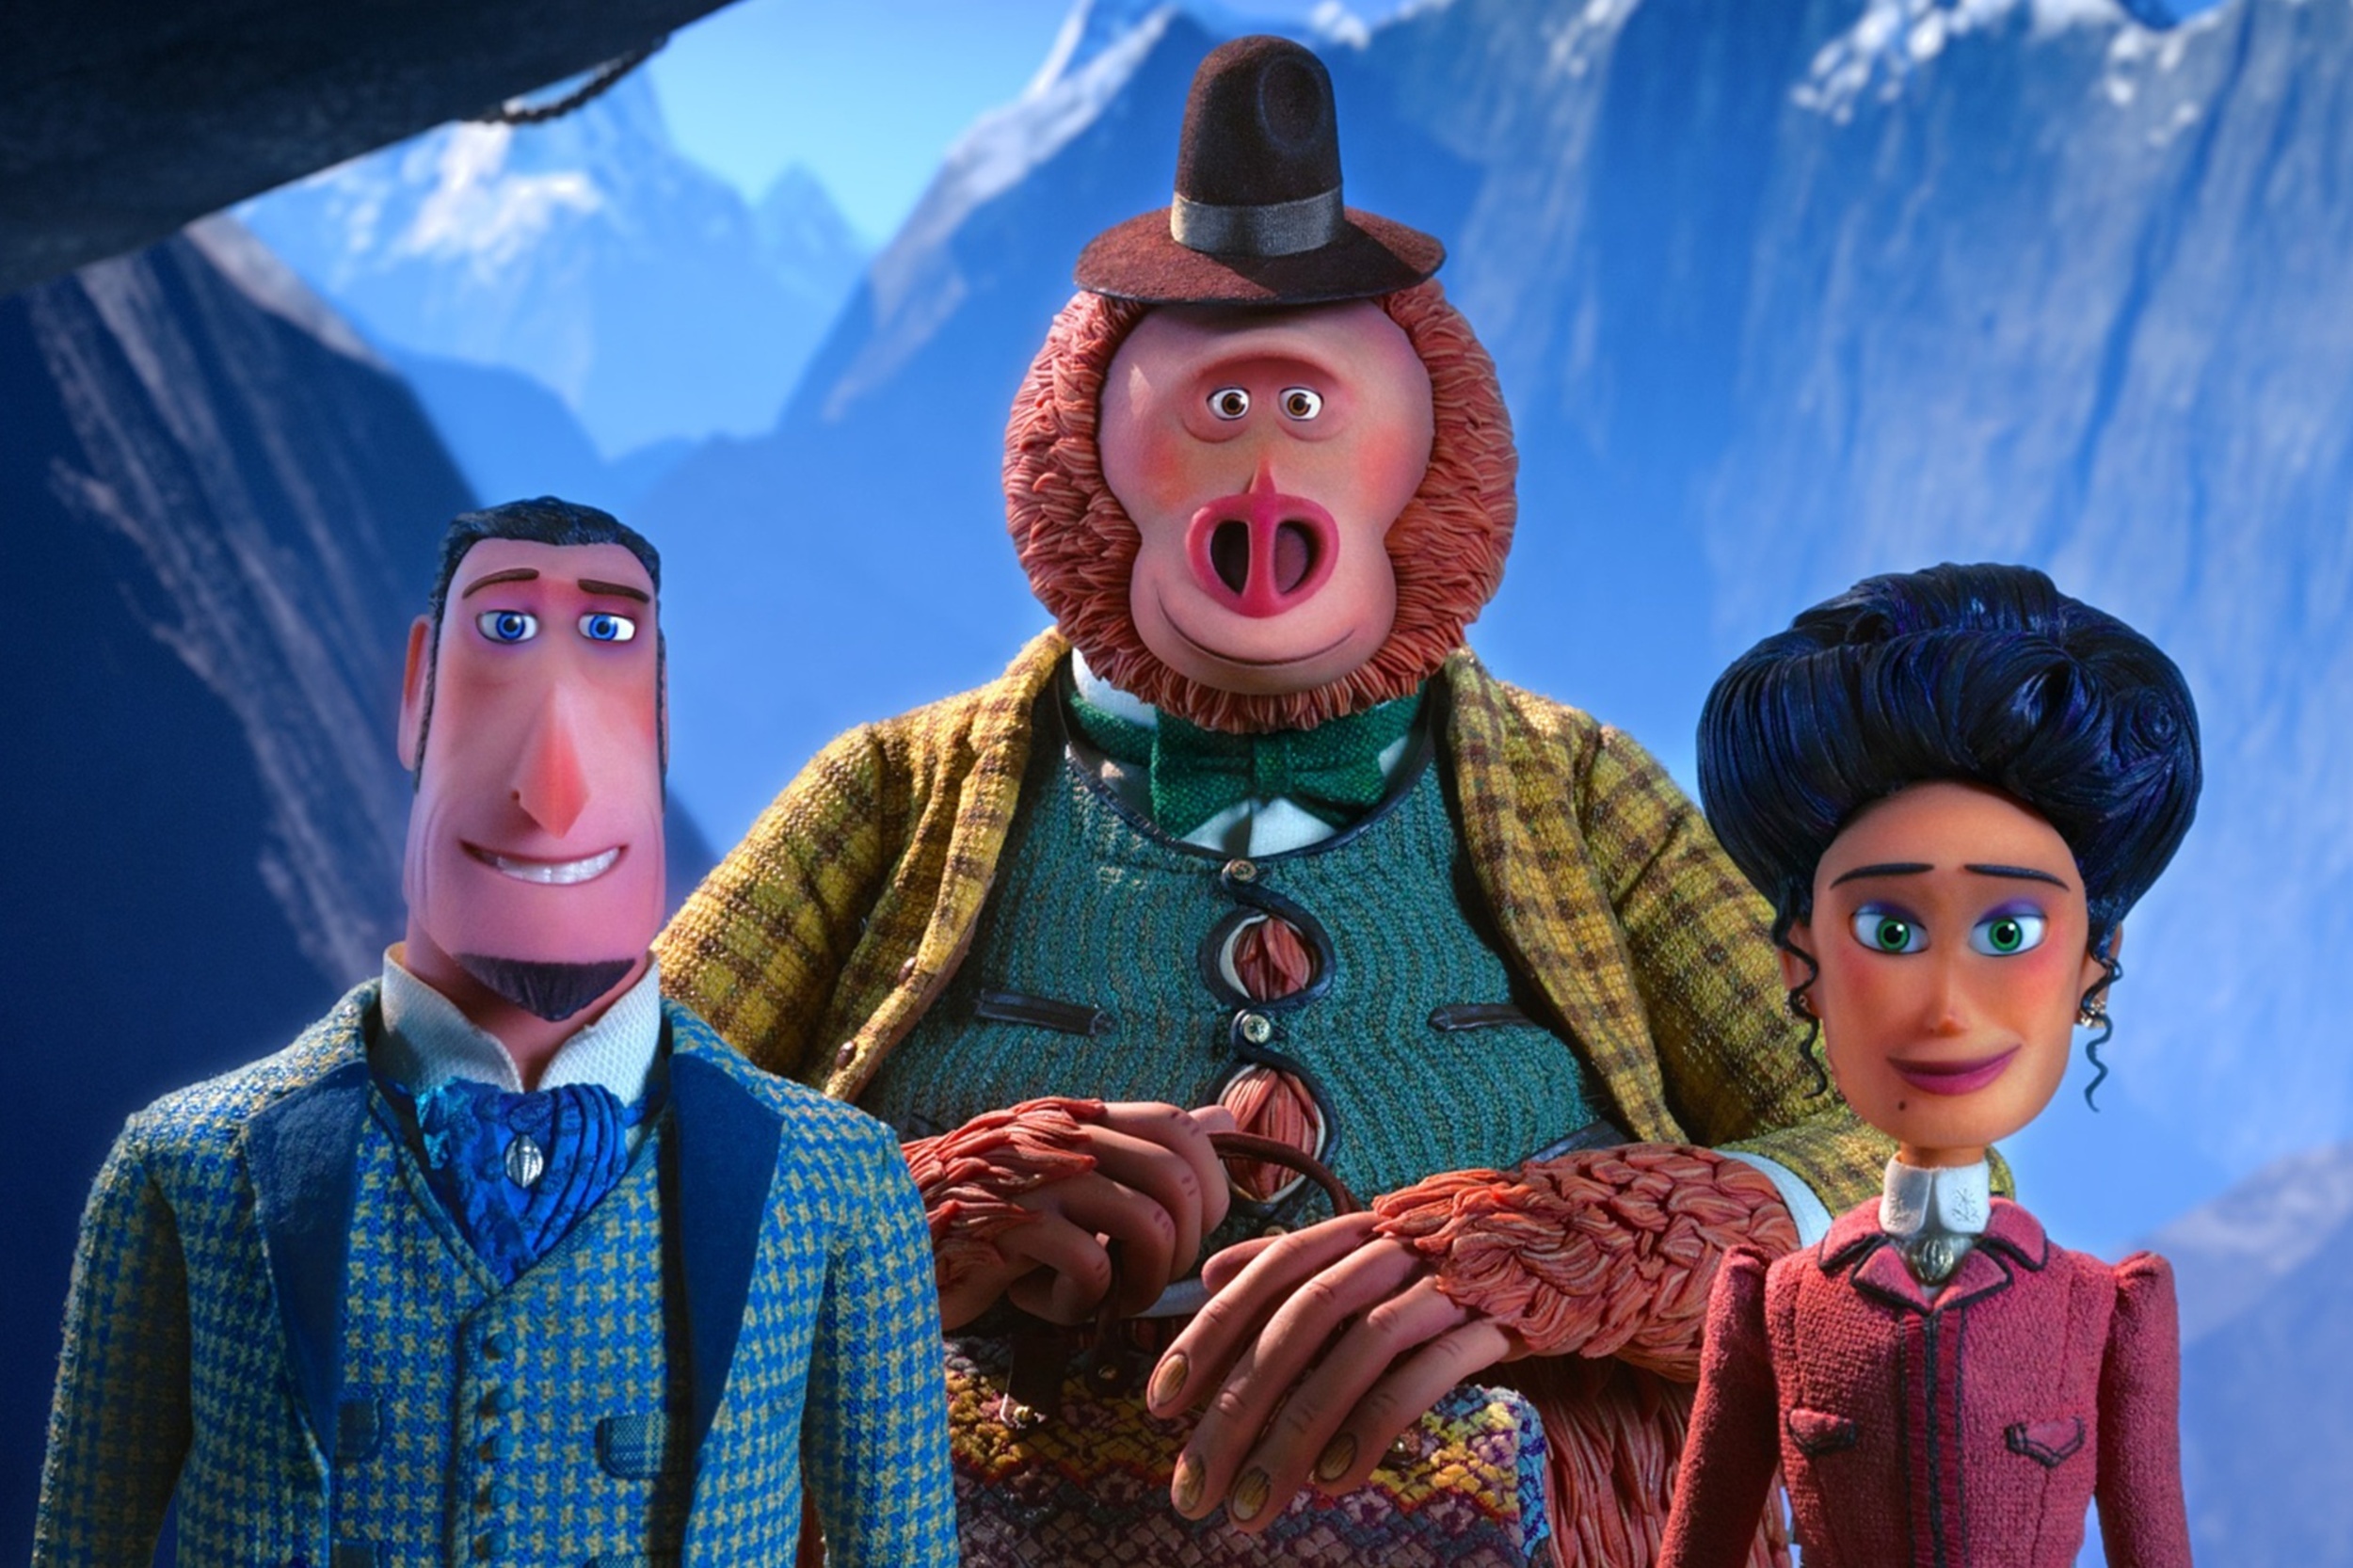 <p>Laika ditches ghost stories and demons with <em>Missing Link</em>, a good old-fashioned adventure flick. Zach Galifianakis voices the mythical creature, who recruits explorer Sir Lionel Frost to help him travel across America to find his relatives. Featuring the painstakingly crafted stop-motion animation Laika is known for, the film is full of heart and humor and has many positive real-world lessons to teach its audience. It also won a Golden Globe for Best Animated Film. </p><p>You may also like: <a href='https://www.yardbarker.com/entertainment/articles/the_20_movies_that_made_walt_disney_pictures_022824/s1__39818872'>The 20 movies that made Walt Disney Pictures</a></p>